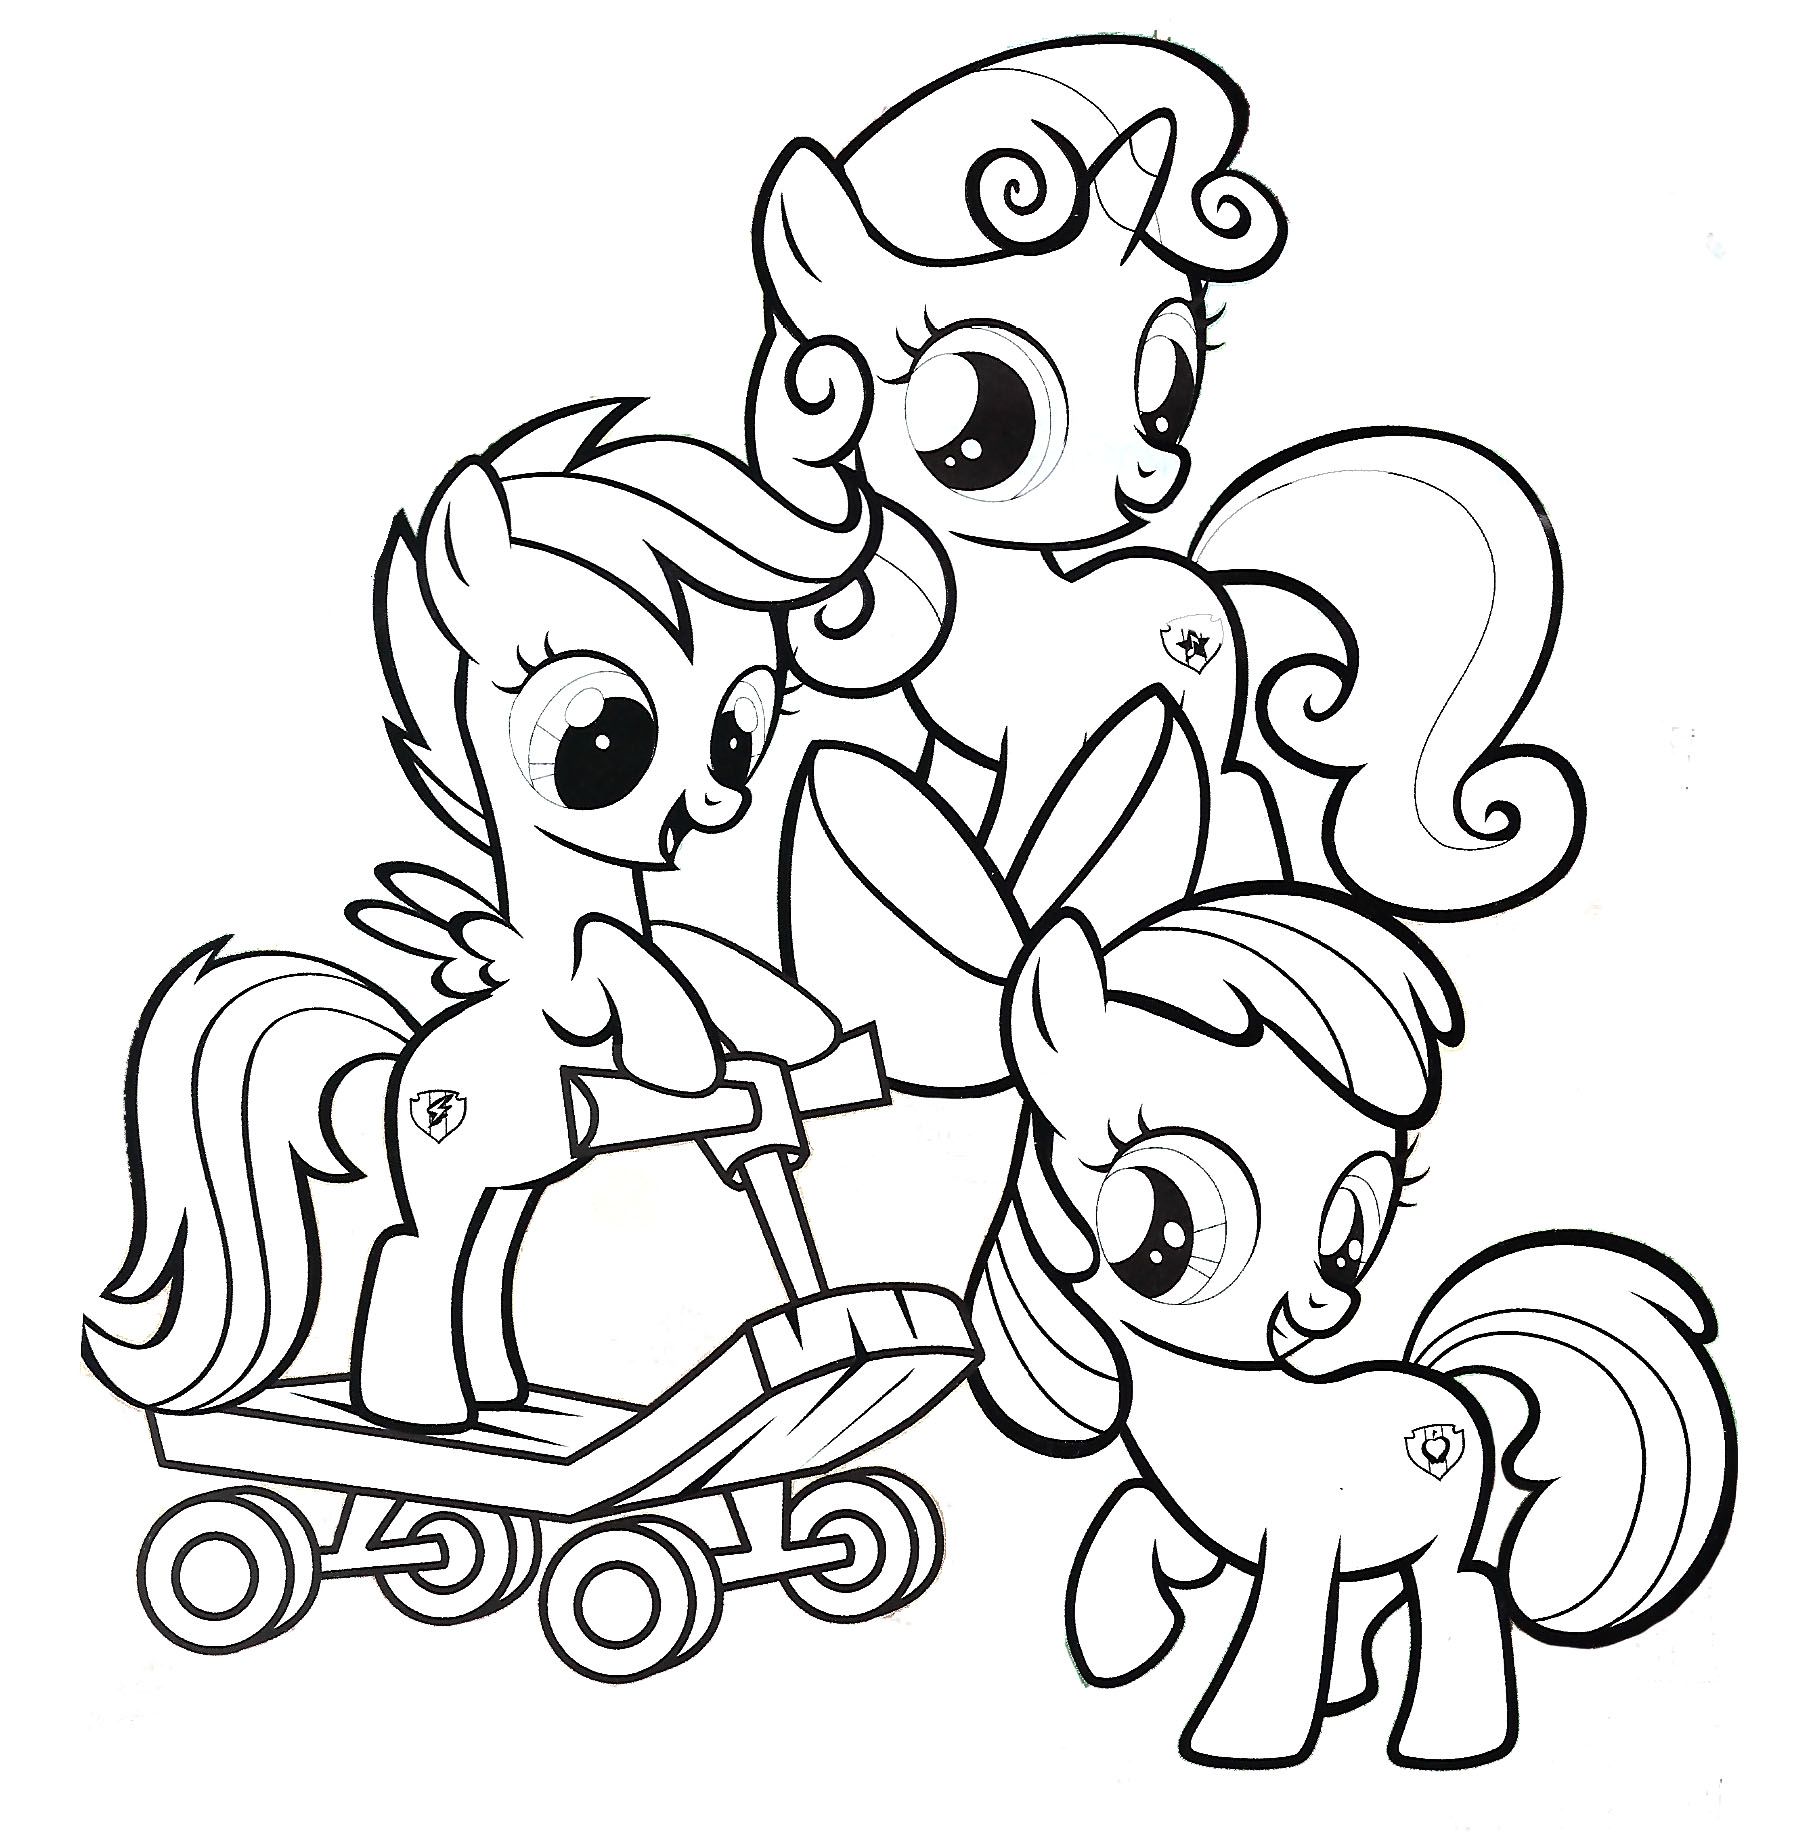 cutie mark crusaders, my little pony coloring page (With images ...